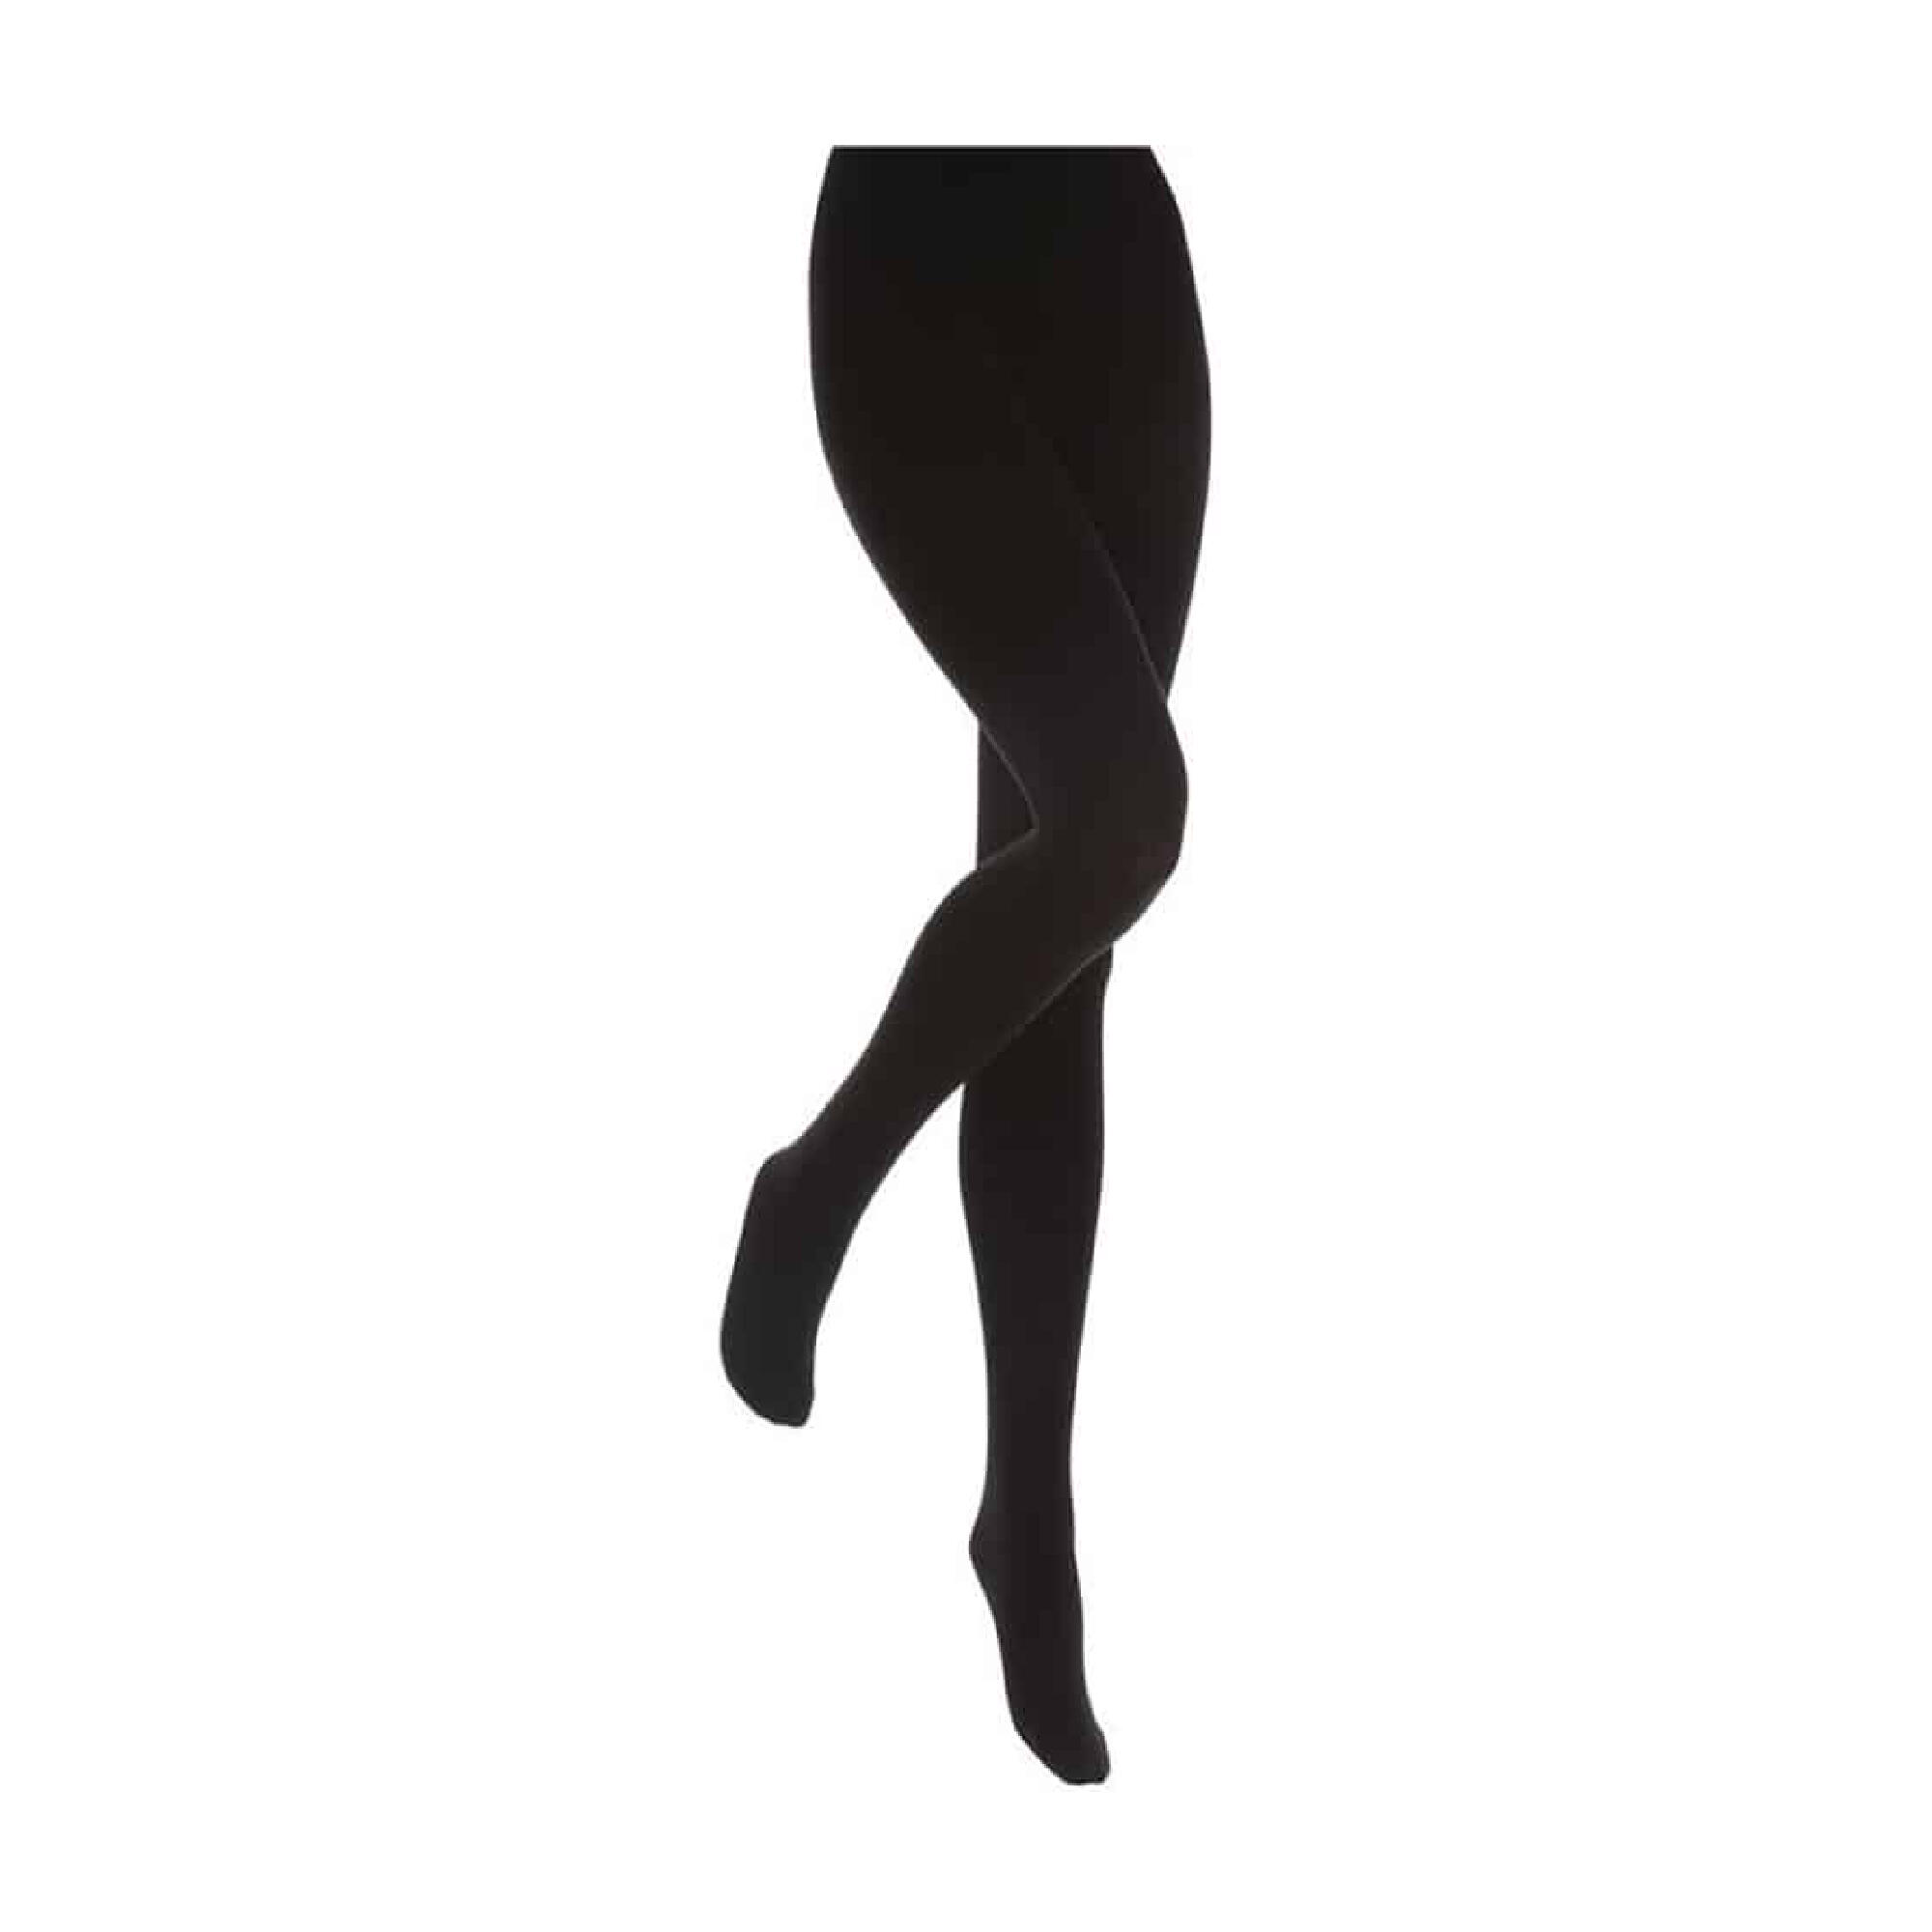 Thick Opaque Tights for Women - Super Warm Fleece Lined Tights